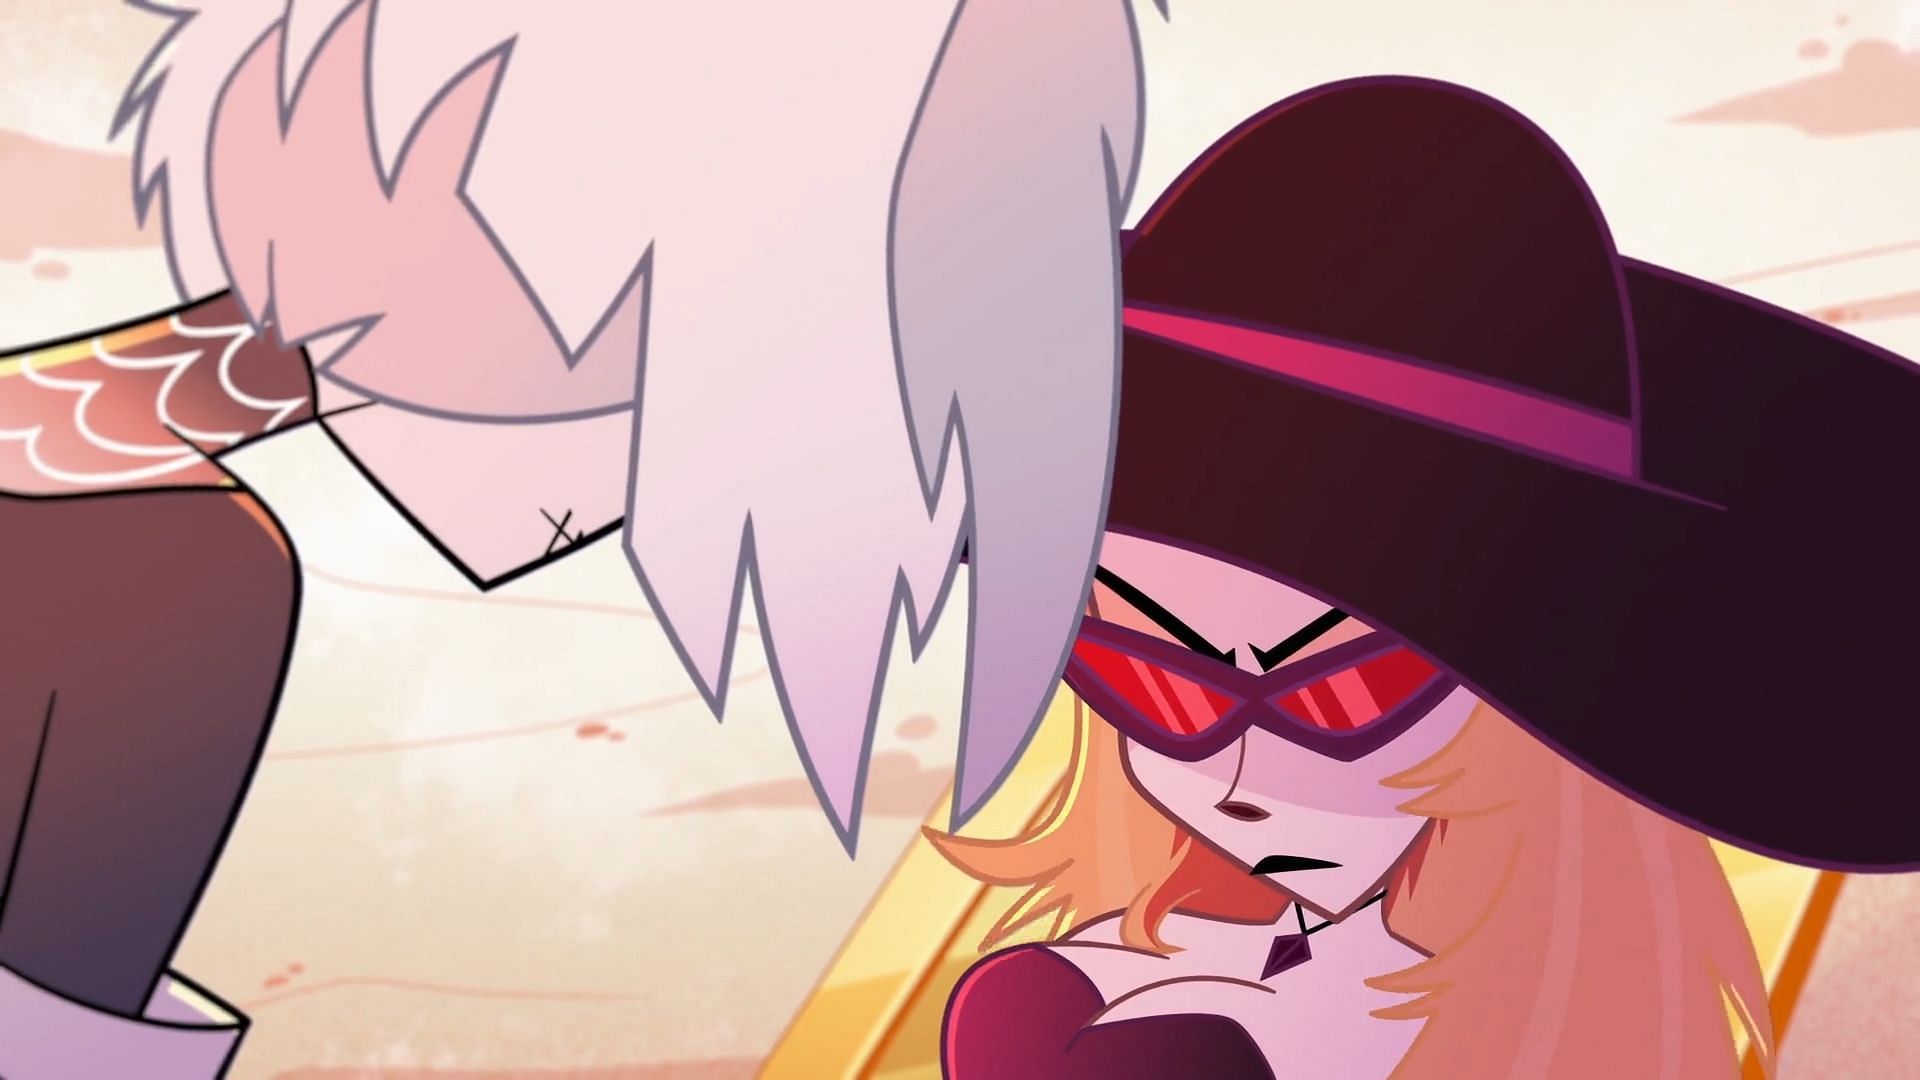 A still of Lilith from the animated series Hazbin Hotel. (Image via Prime Video)